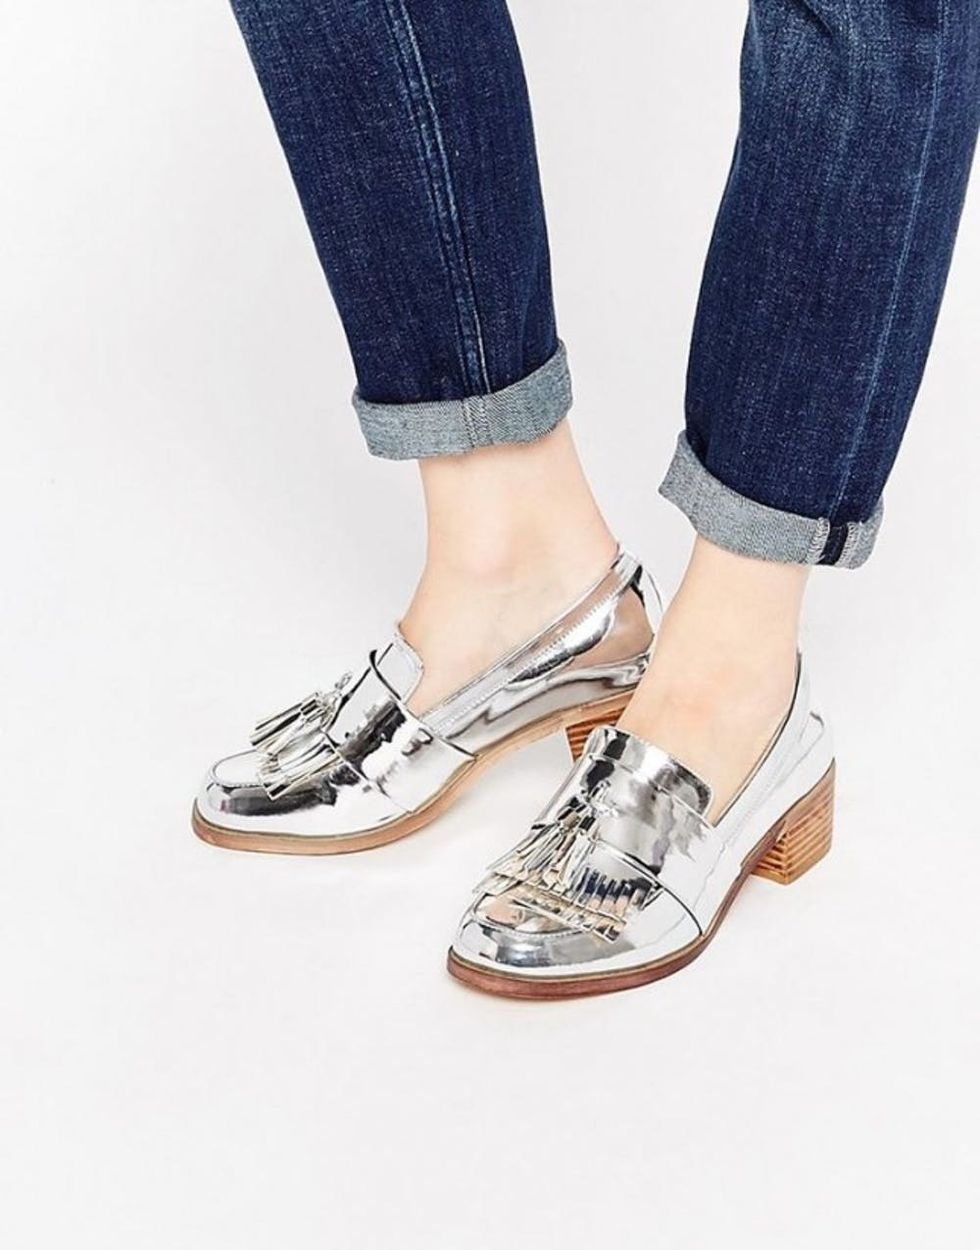 Why You’ll Be Wearing This Grandma Trend Everywhere (+ Your Feet Will ...